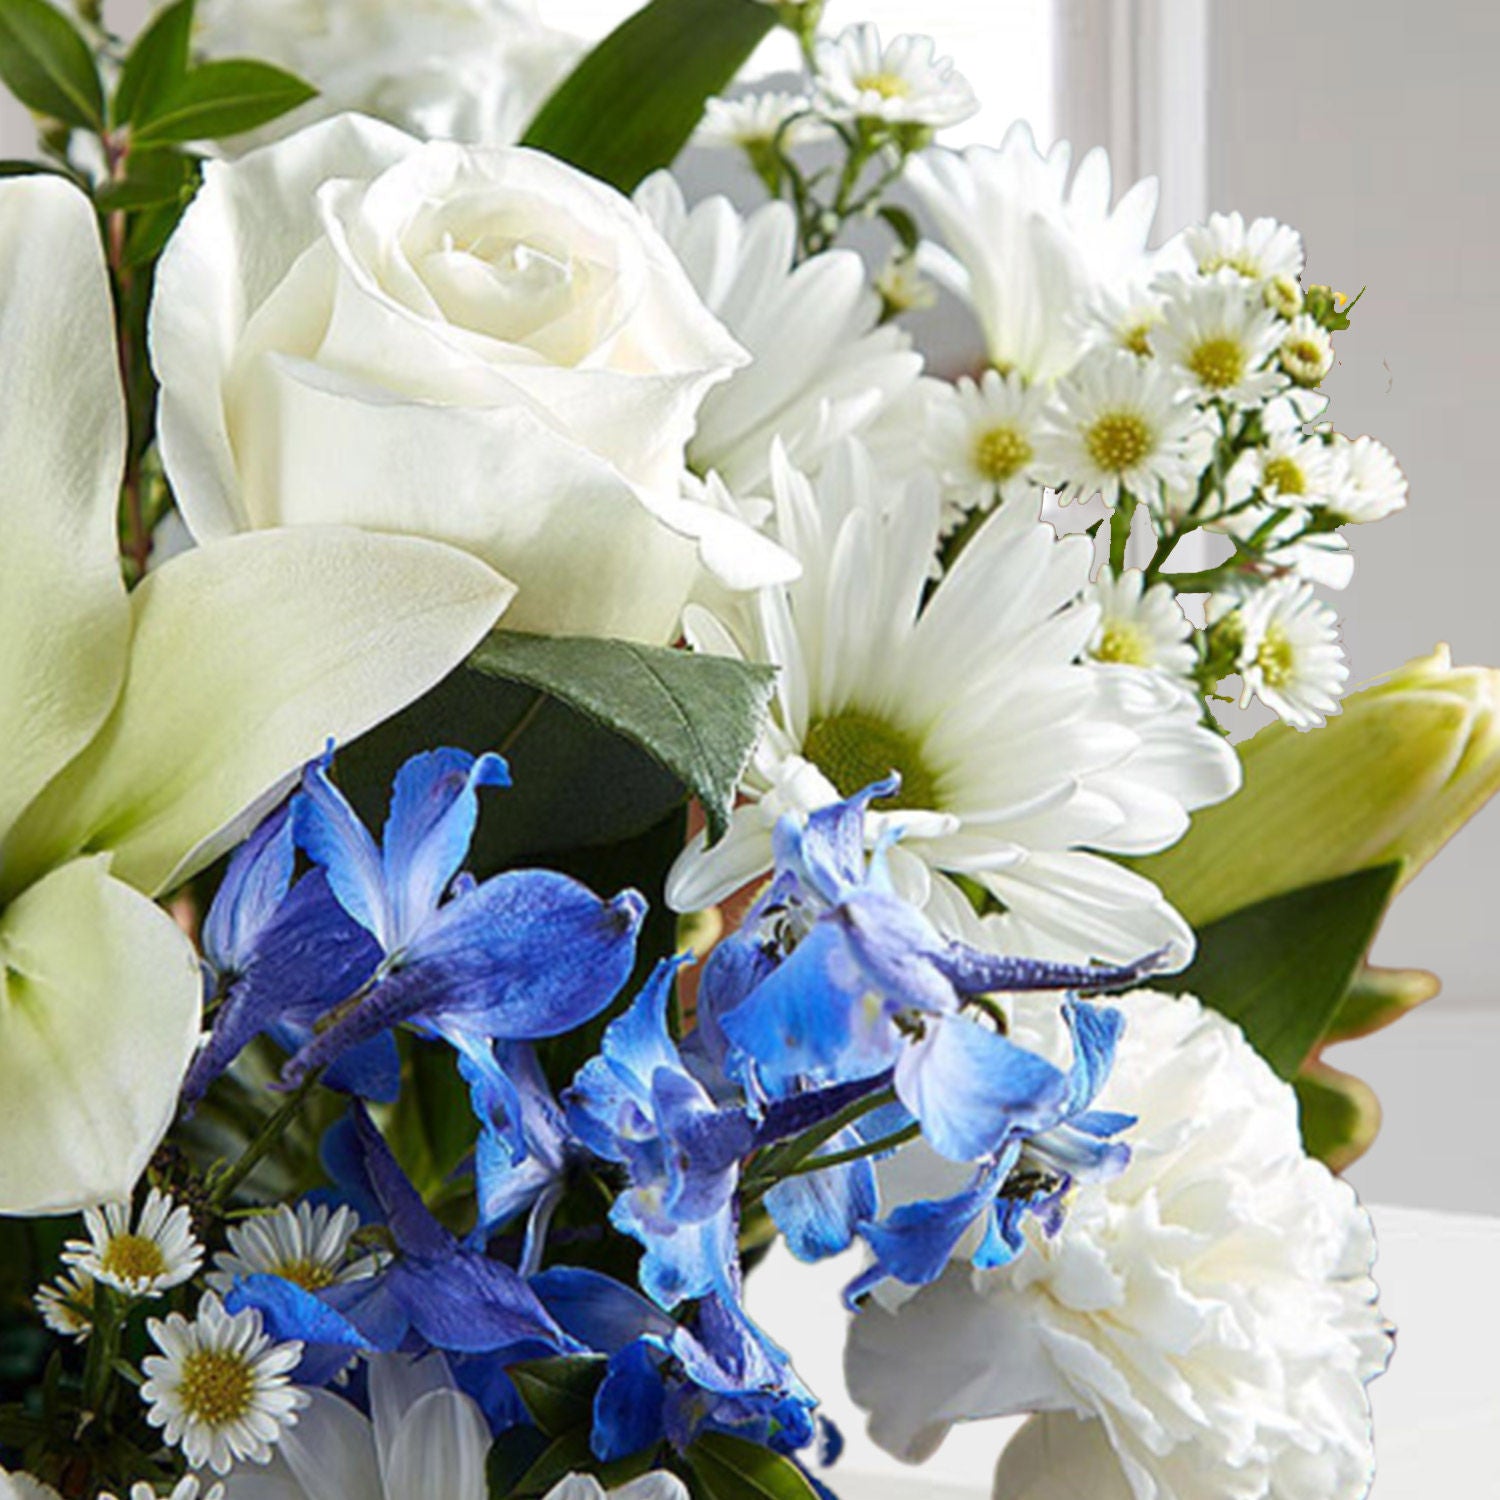 Blue and White Blooms Vase